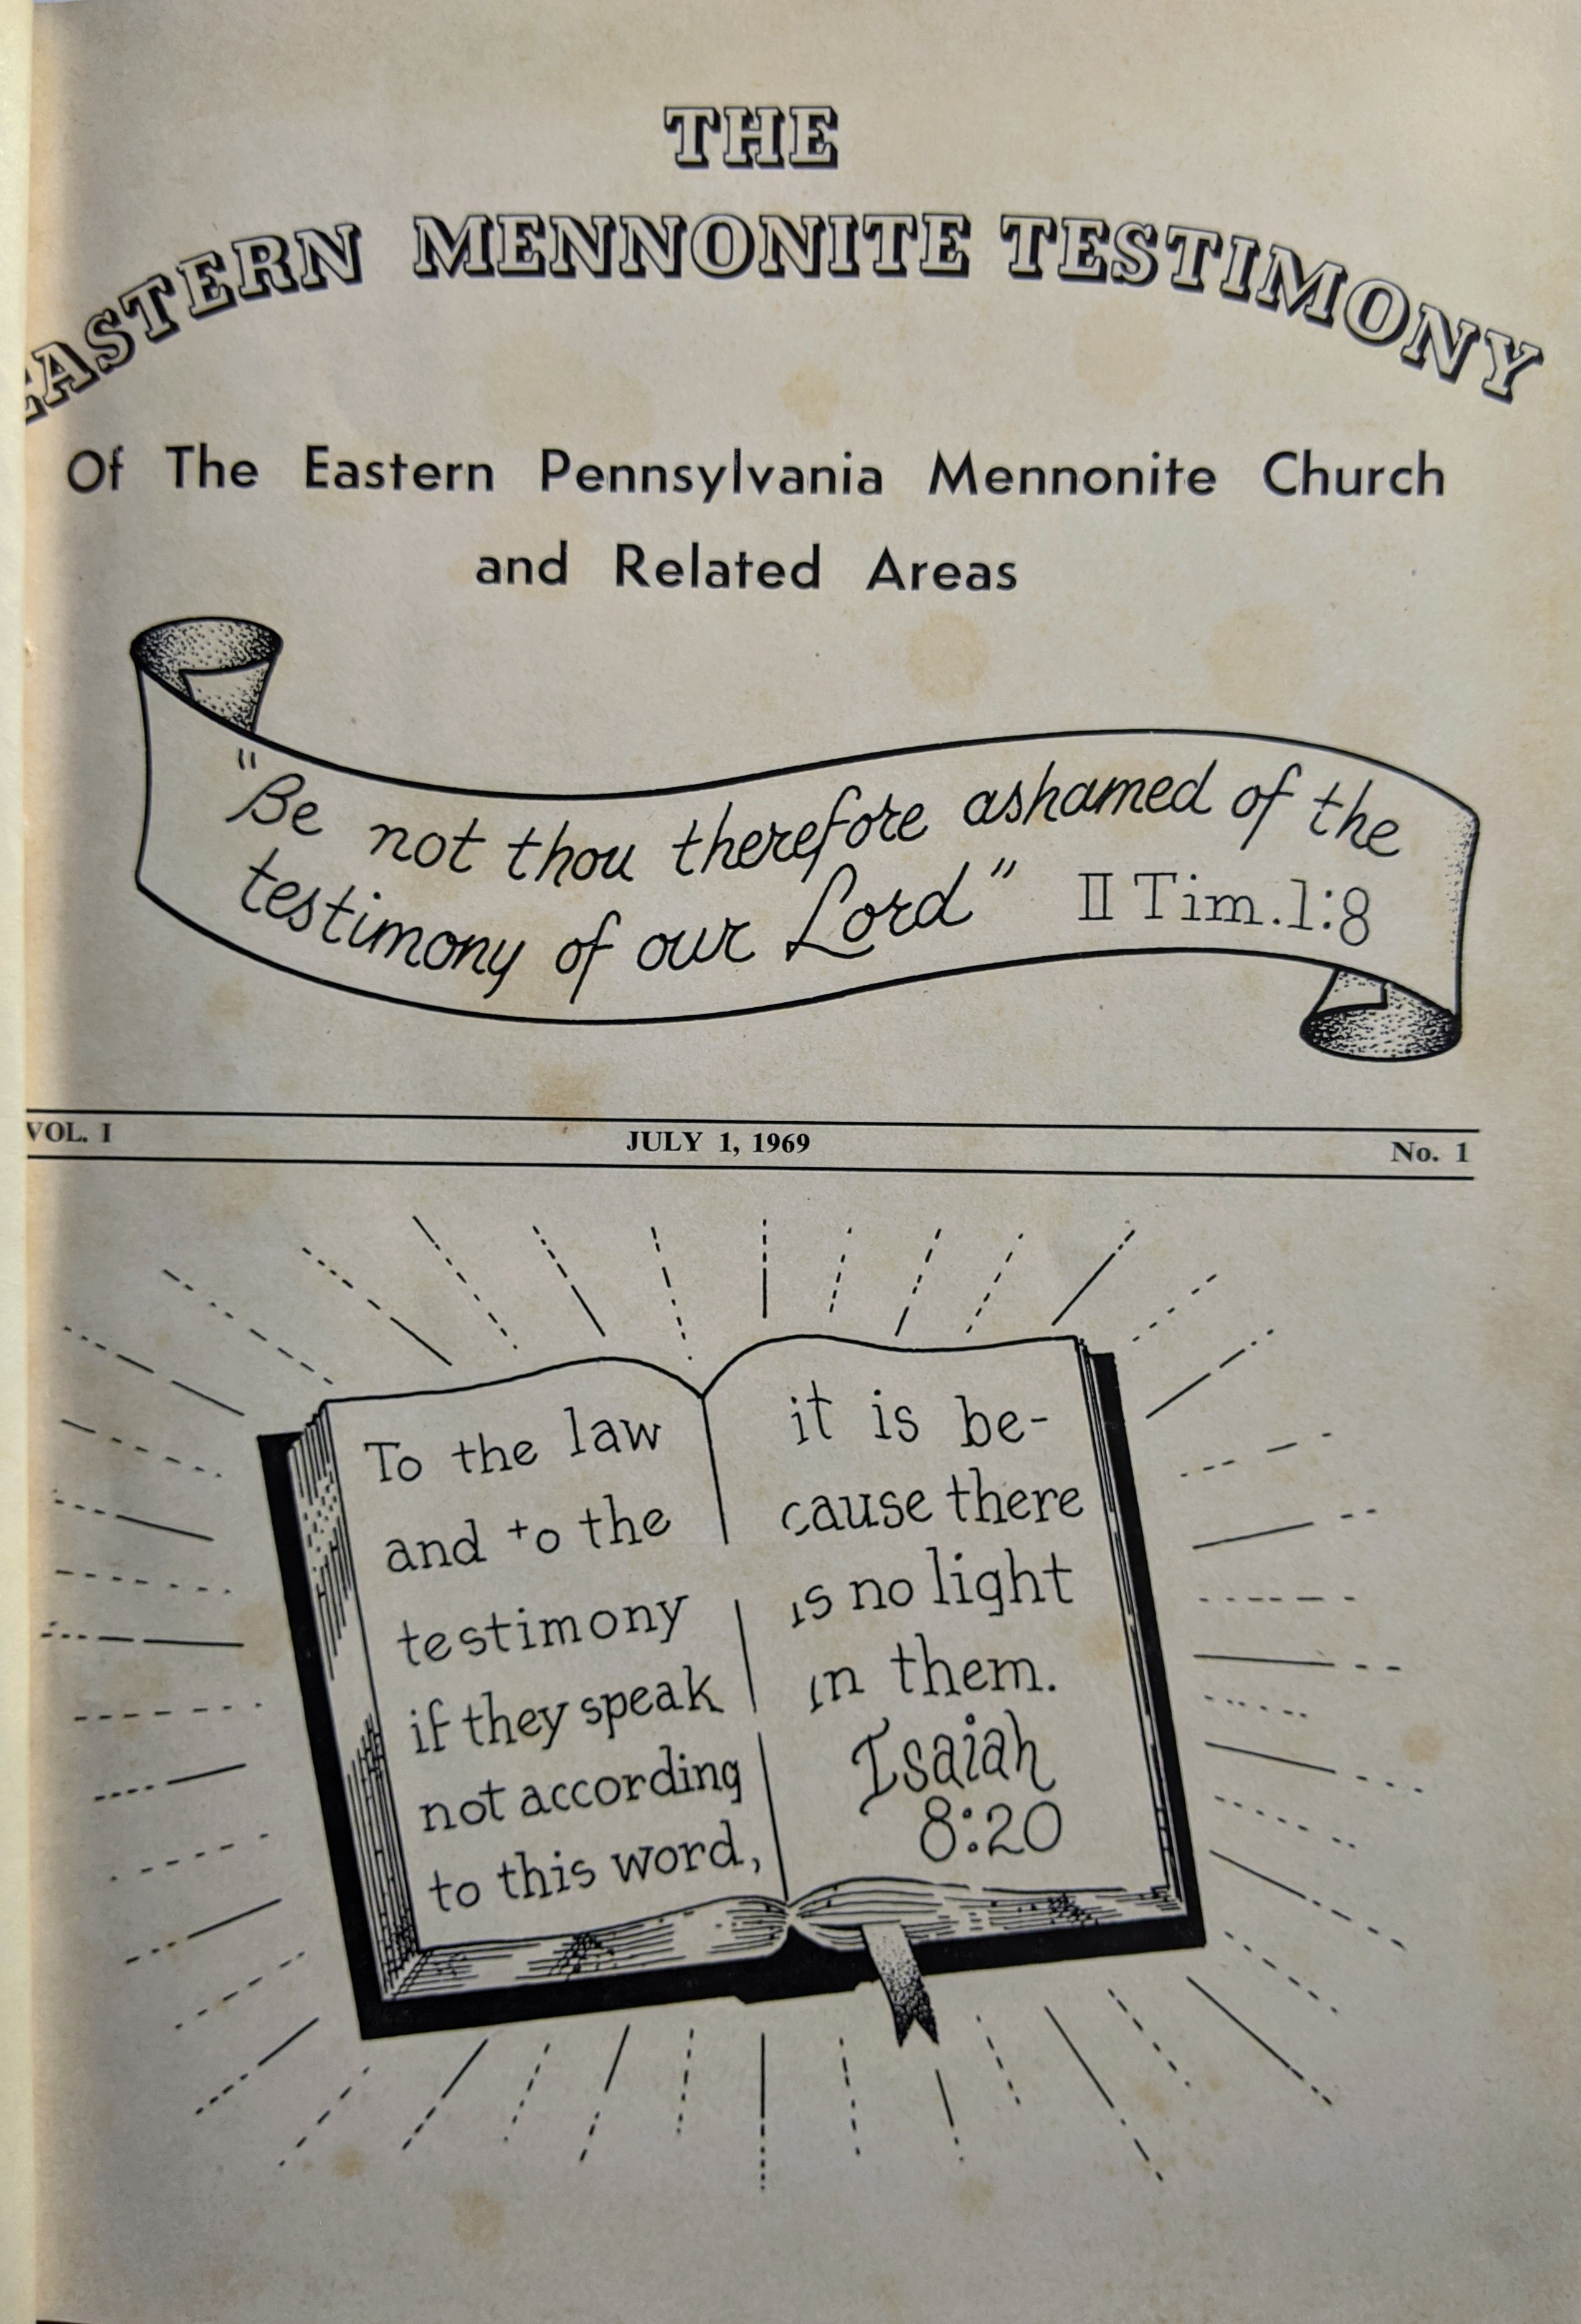 Aaron's design for the EPMC Testimony, copy of first edition.